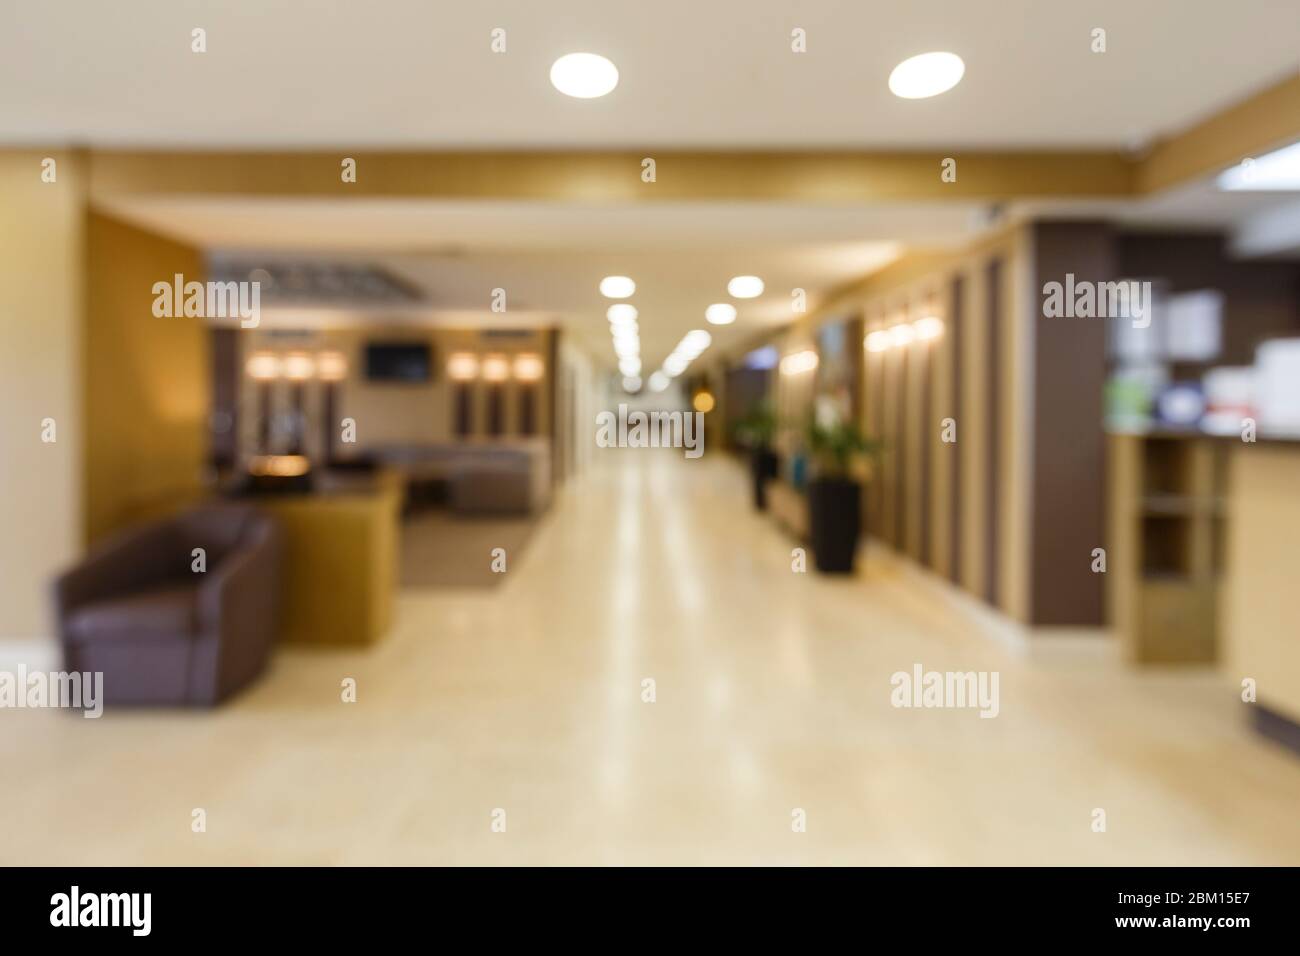 Blurred corridor with light lamps in hotel. Stock Photo